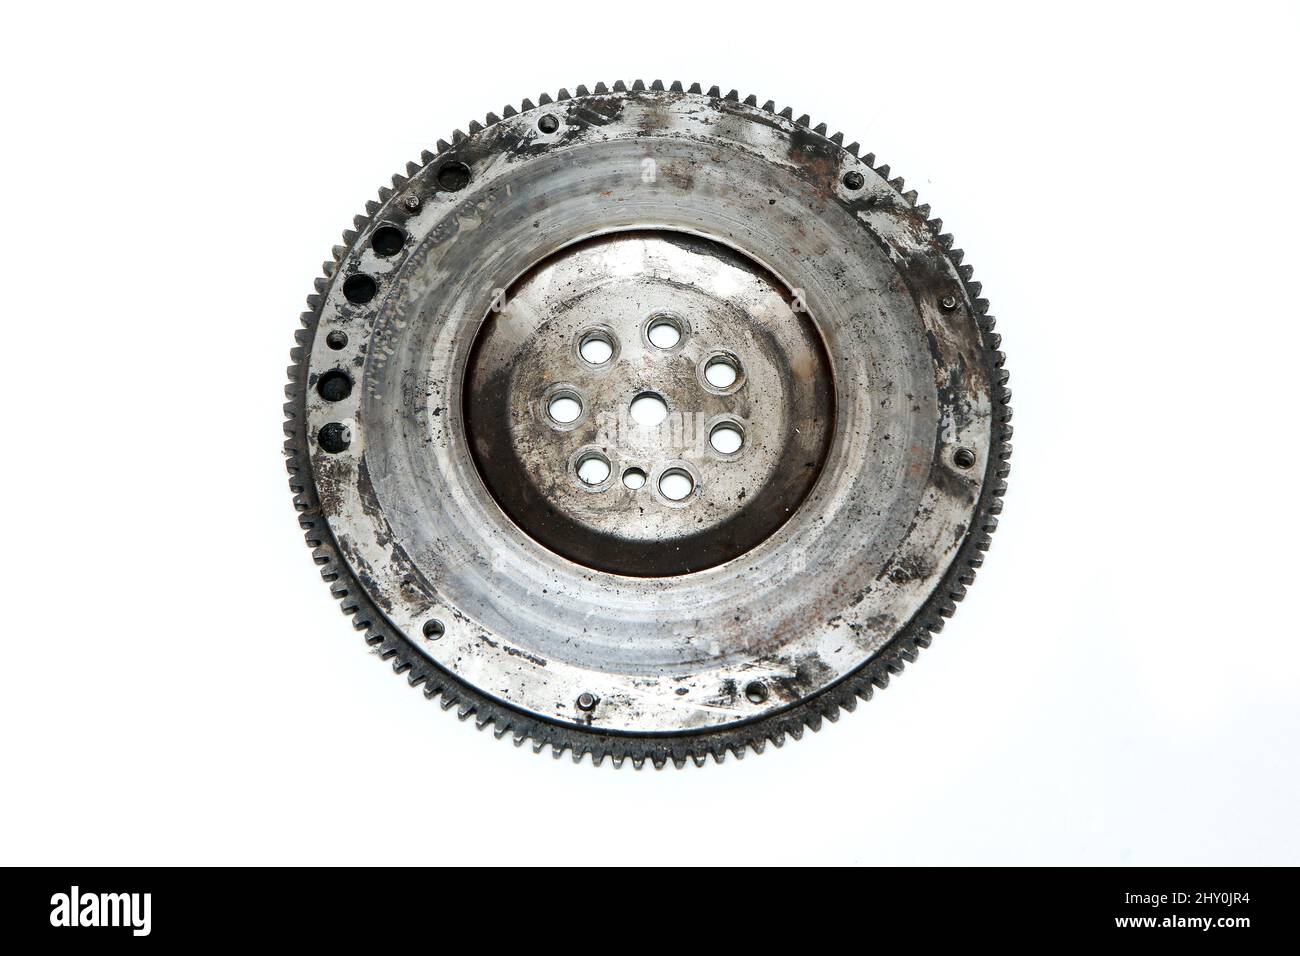 The rusty old used engine flywheel isolated in a white background. Stock Photo